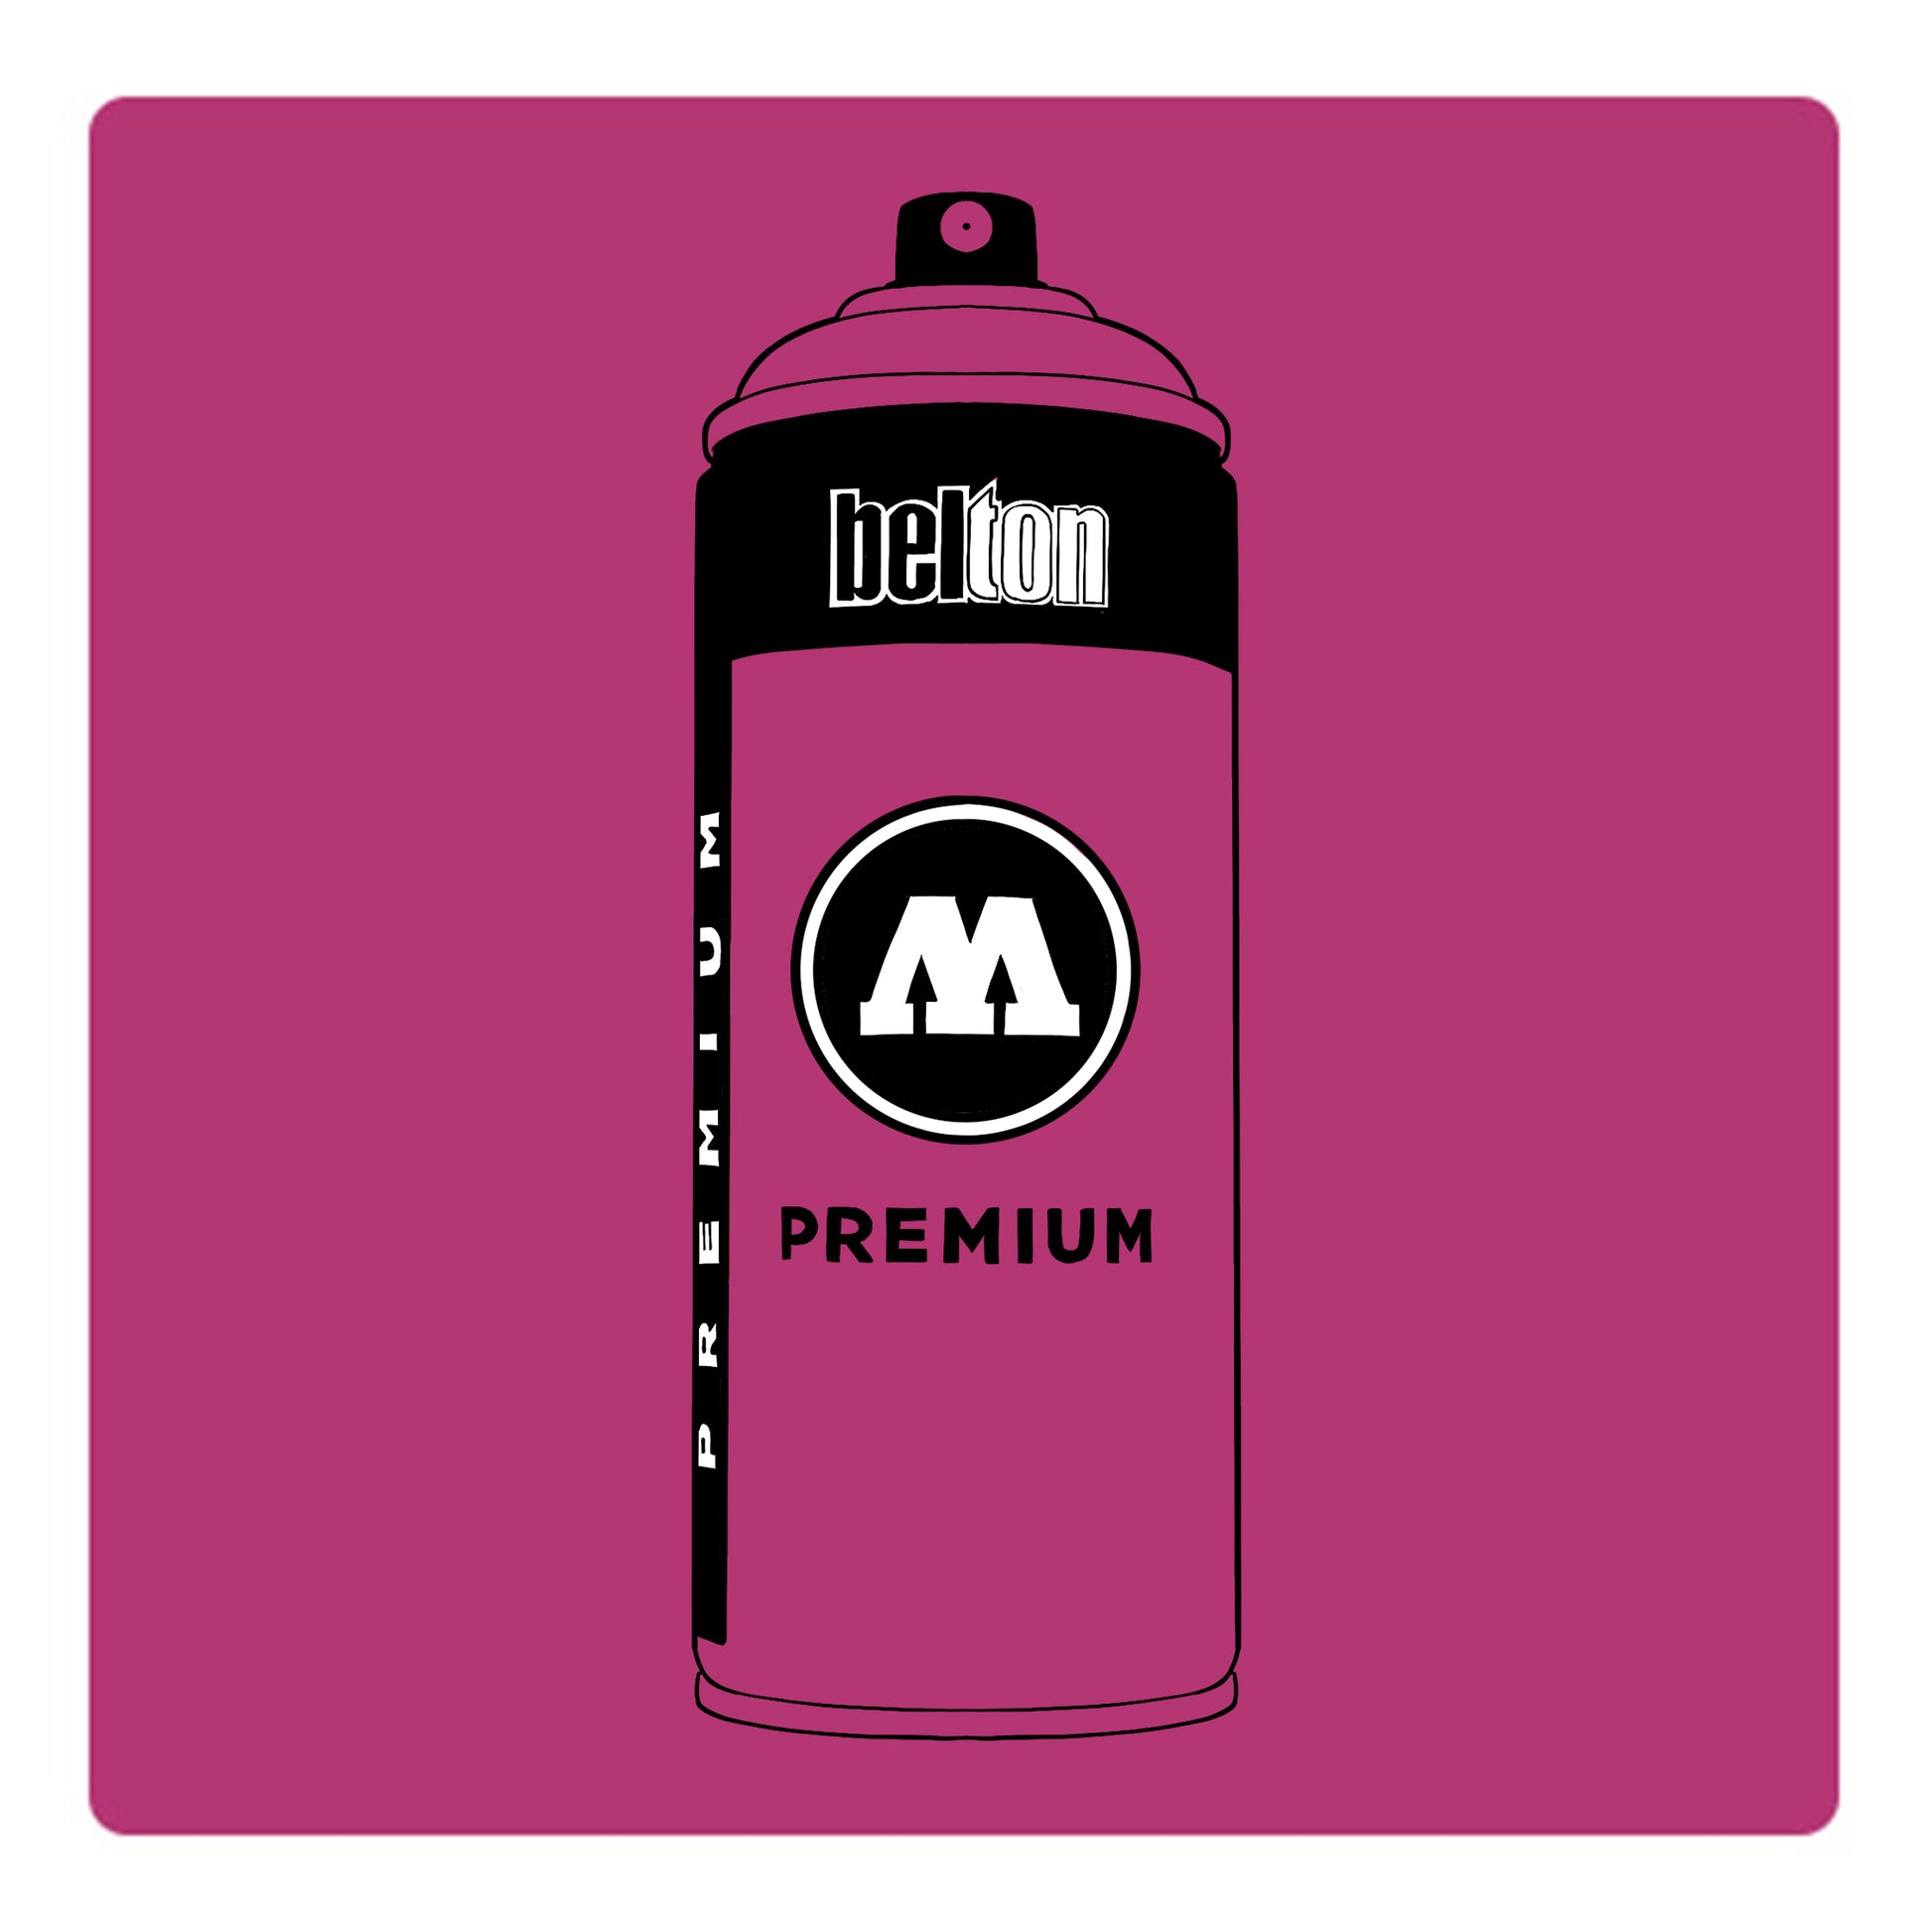 A black outline drawing of a magenta spray paint can with the words "belton","premium" and the letter"M" written on the face in black and white font. The background is a color swatch of the same magenta with a white border.